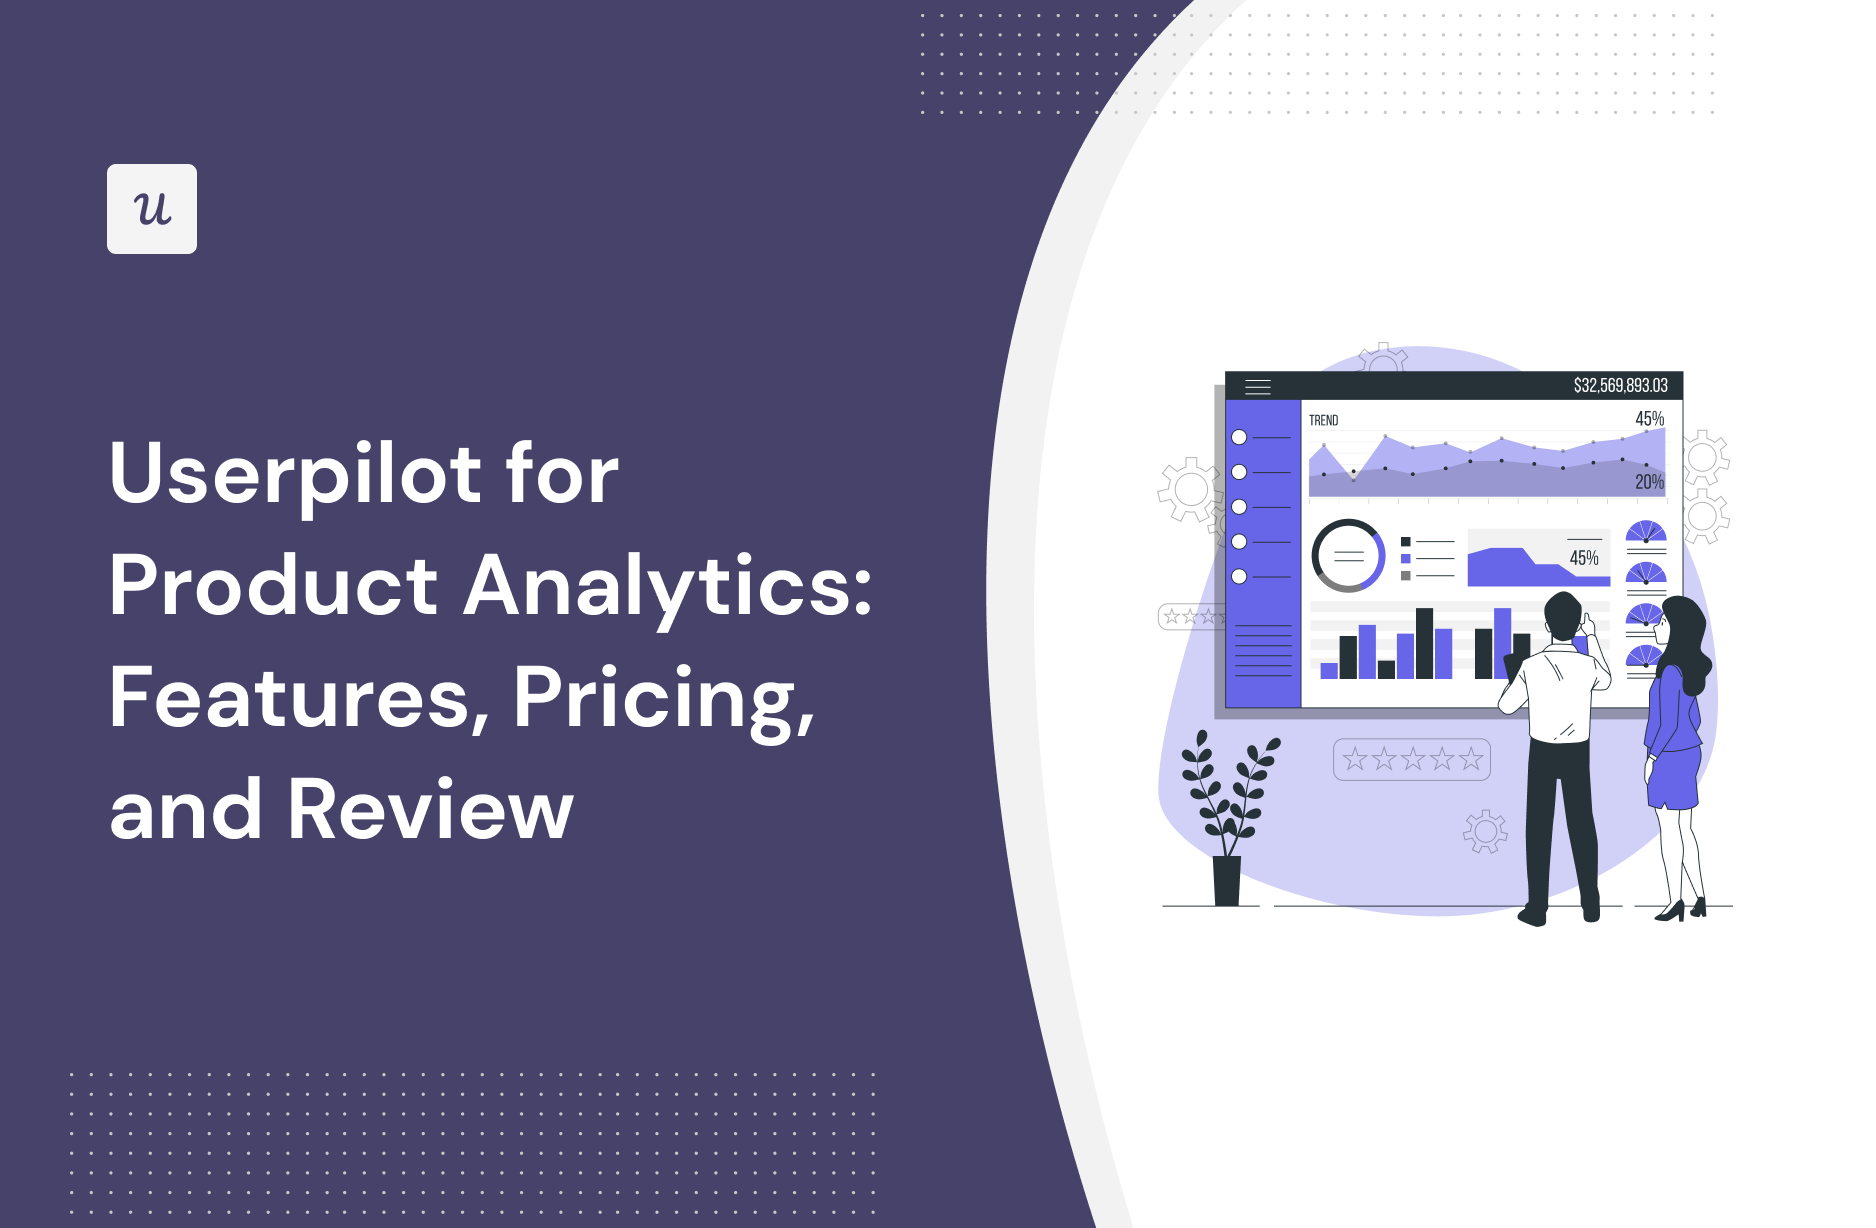 Userpilot for Product Analytics: Features, Pricing, and Review